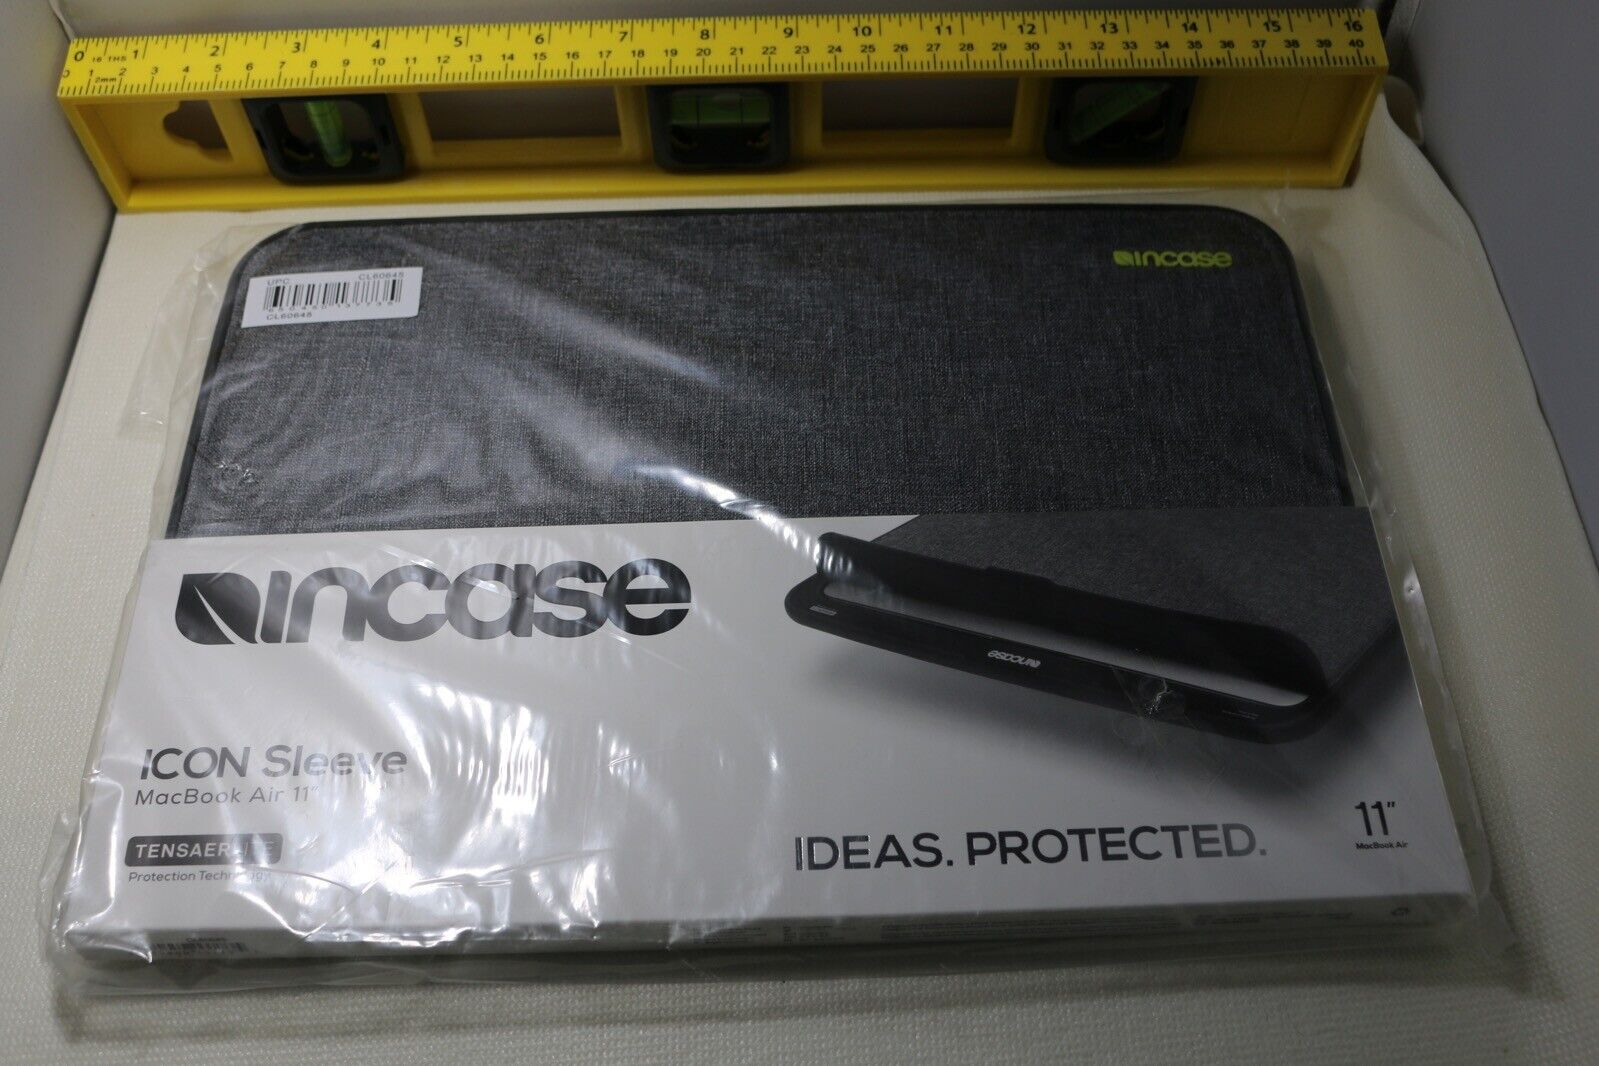 LAPTOP SLEEVE InCase Icon For MacBook Air 11 Inch Tensaer Lite (BRAND NEW)